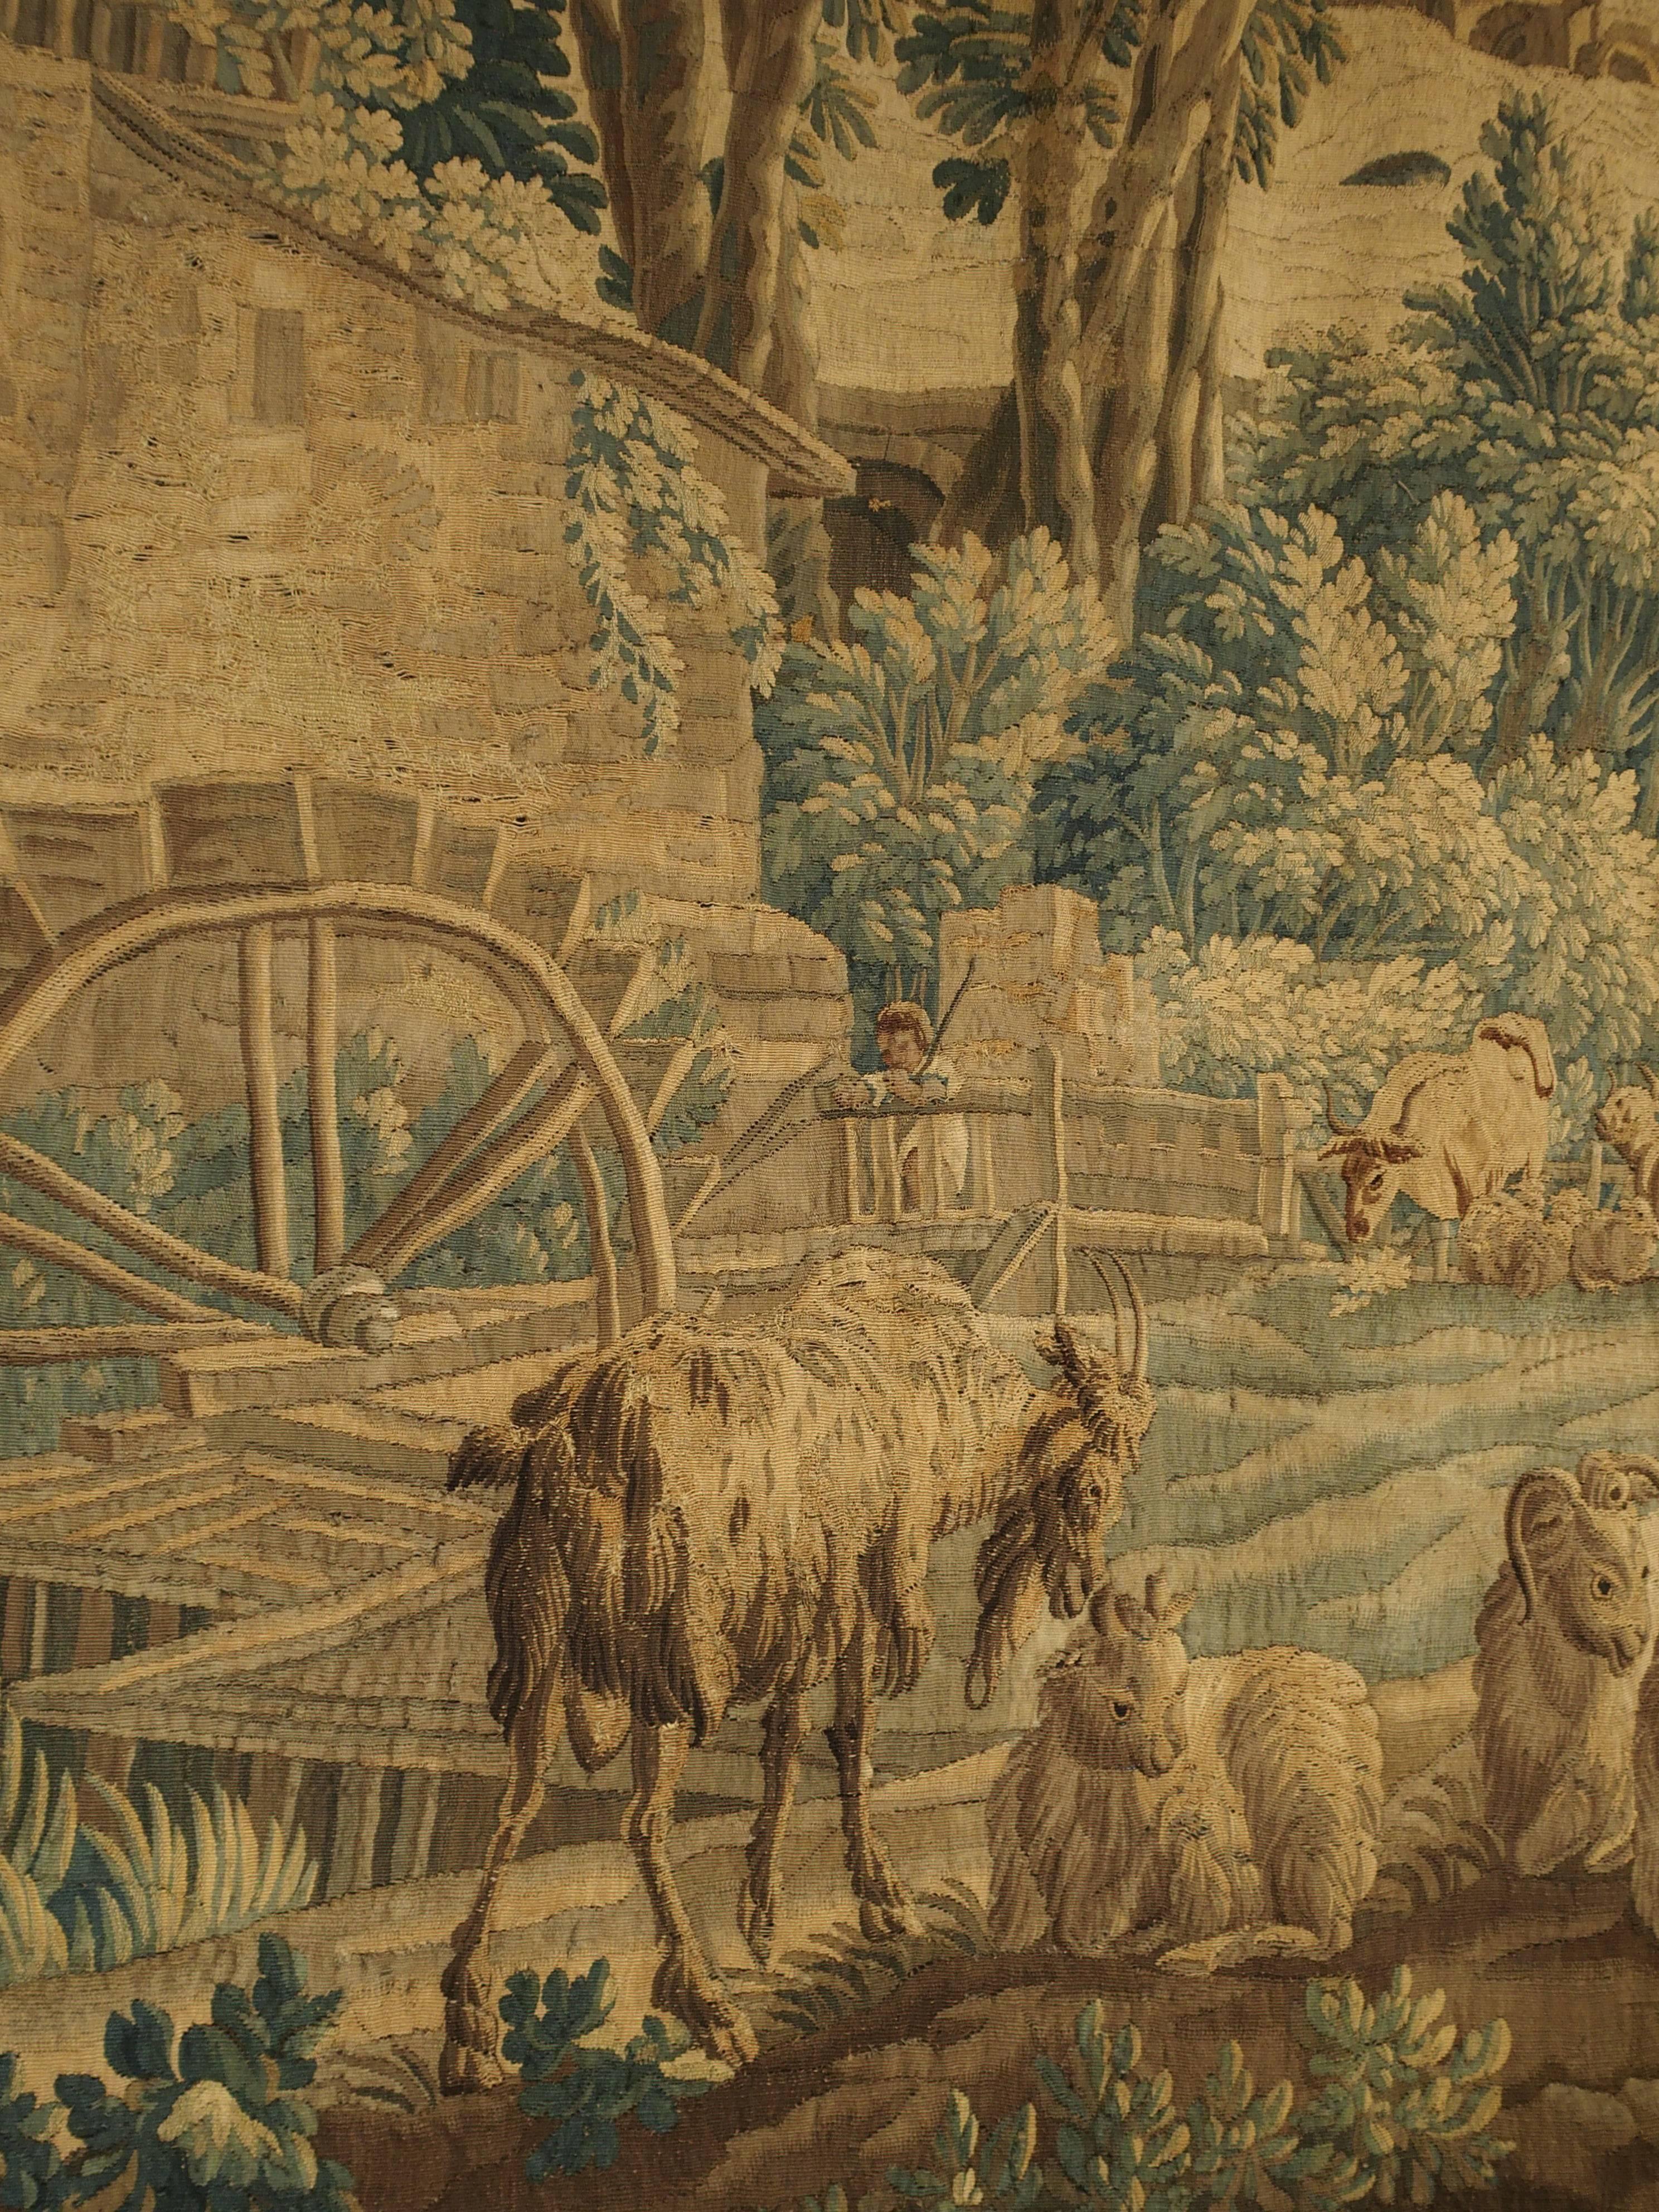 This stunning Aubusson tapestry was woven in the mid-18th century from silk and wool. It is after the work of the French artist Francois Boucher, titled “Le Moulin de Charenton”. The focal point of the tapestry scene is the stone house with a large